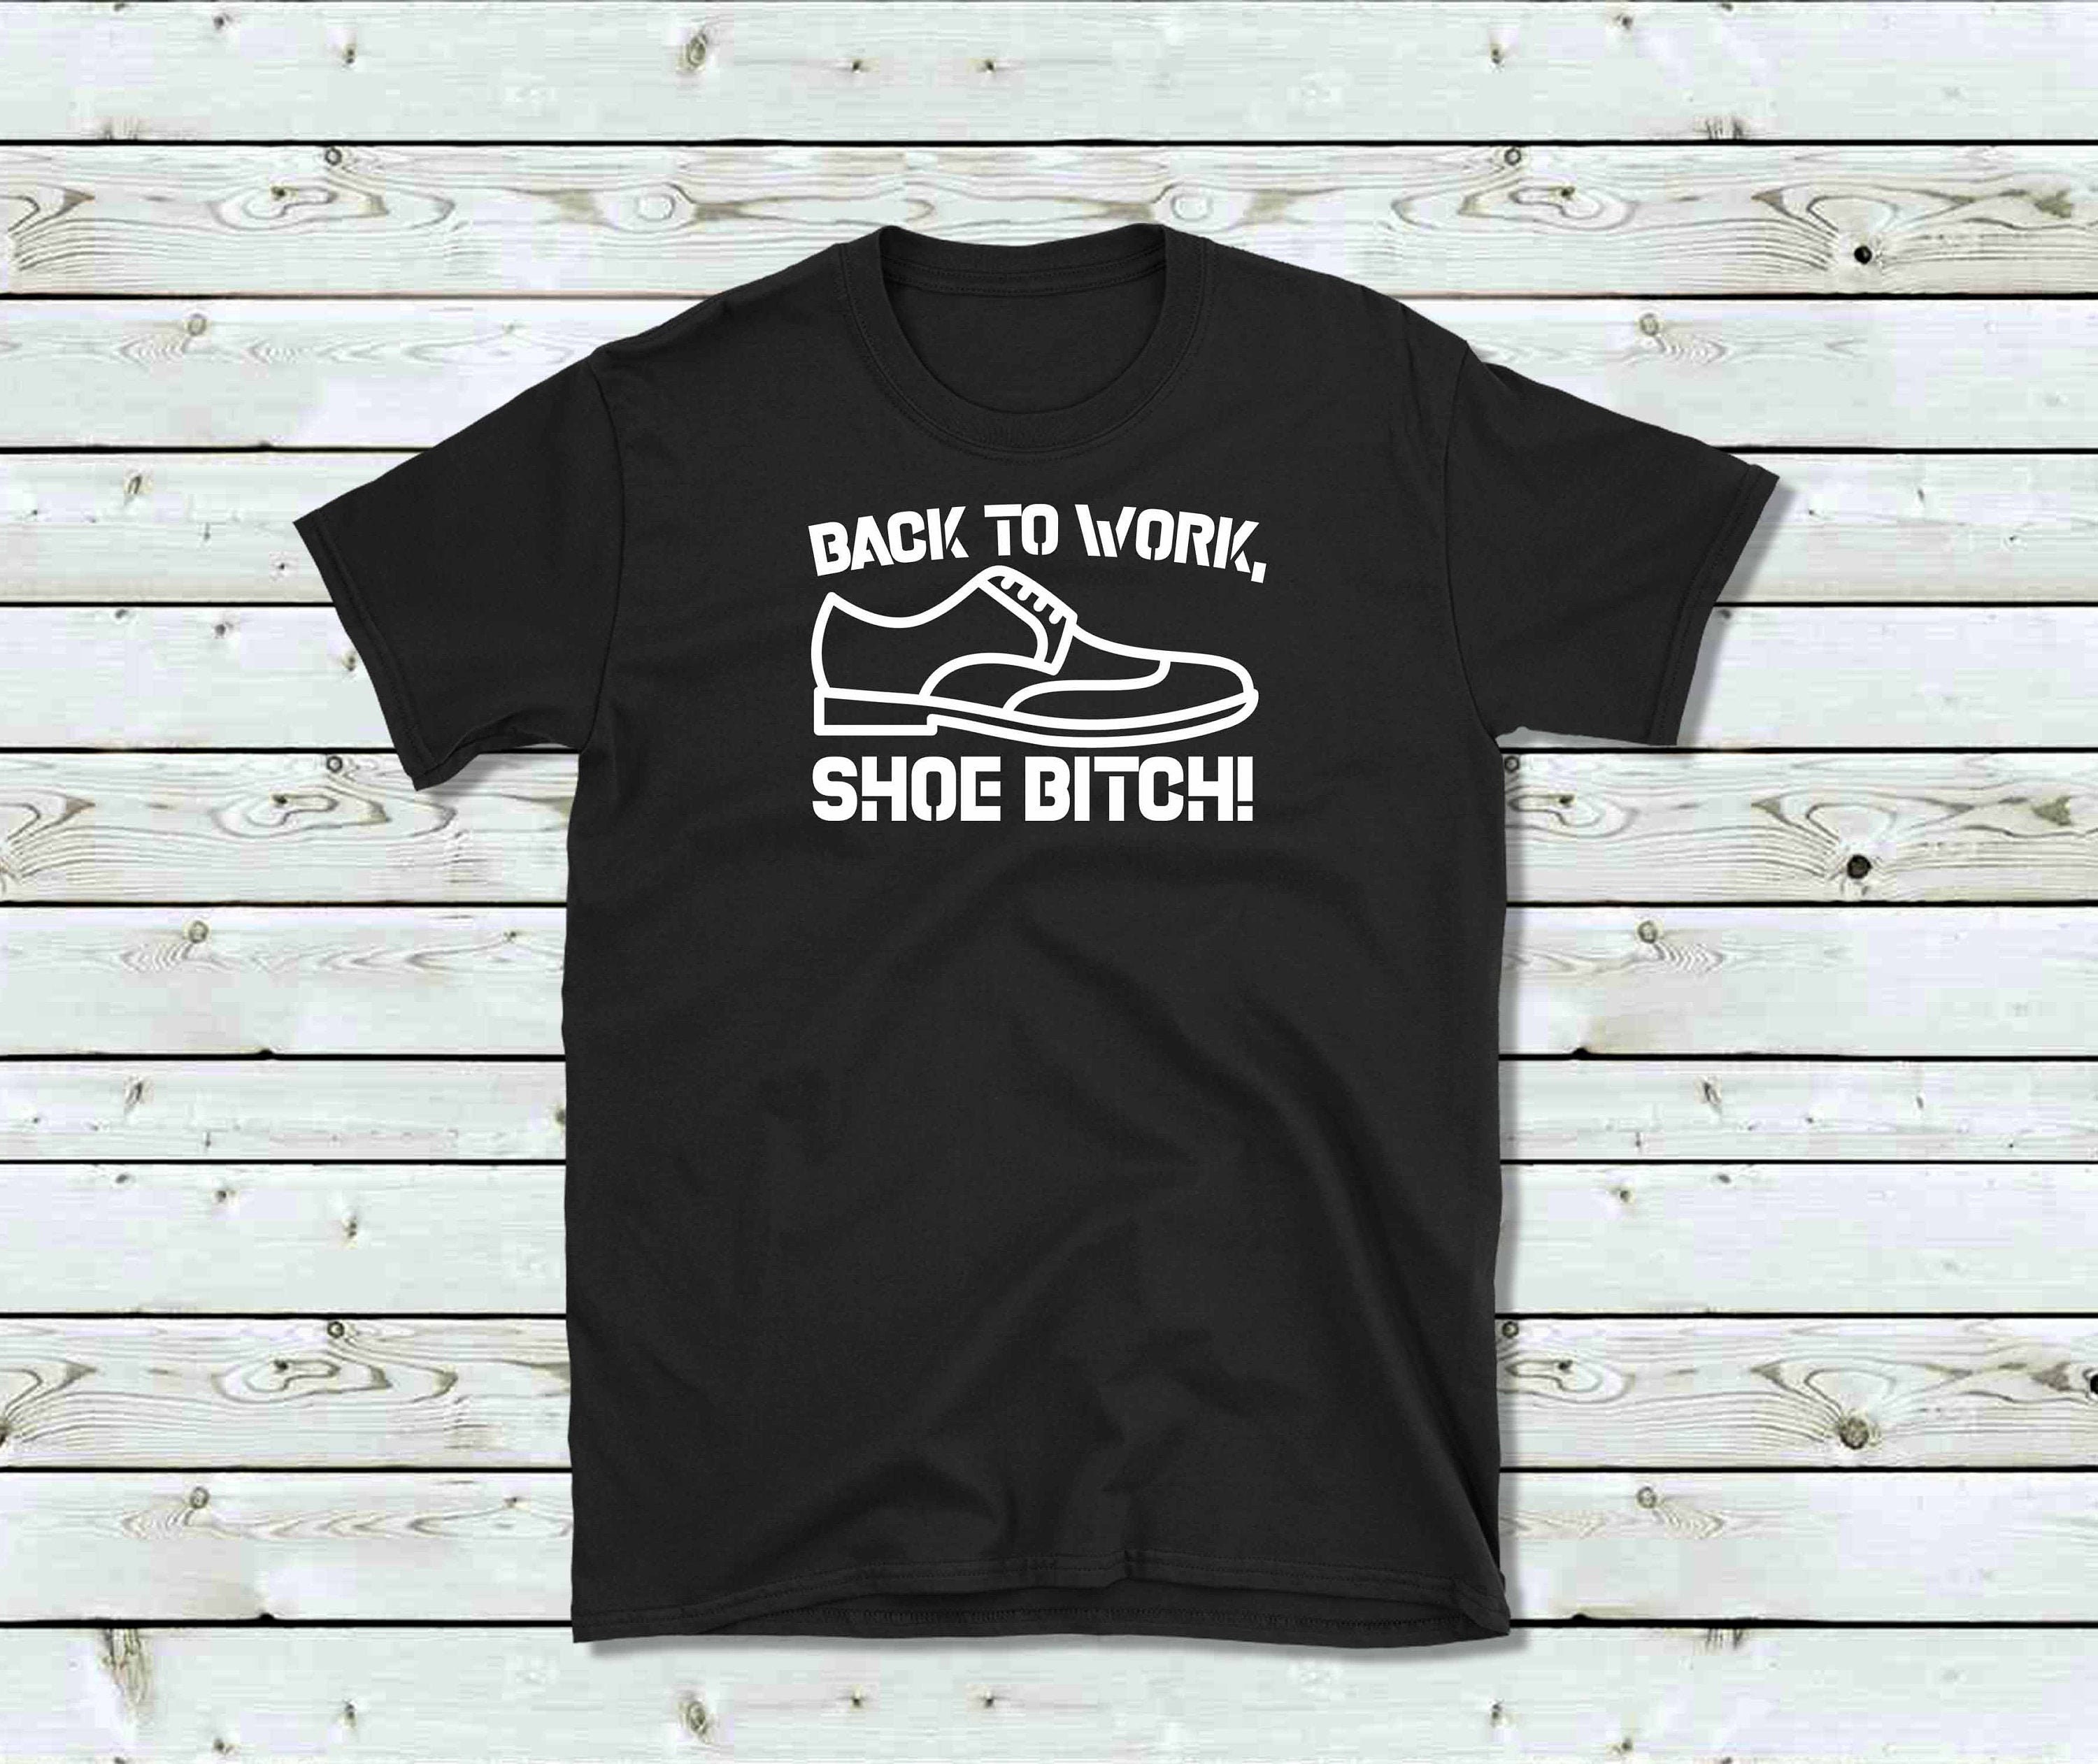 Back to Work, Shoe Bitch! - Ryan Howard, Bowling Alley, The Office - 100%  Cotton T-shirt - Deep Tracks Only Original T-shirt - The Office